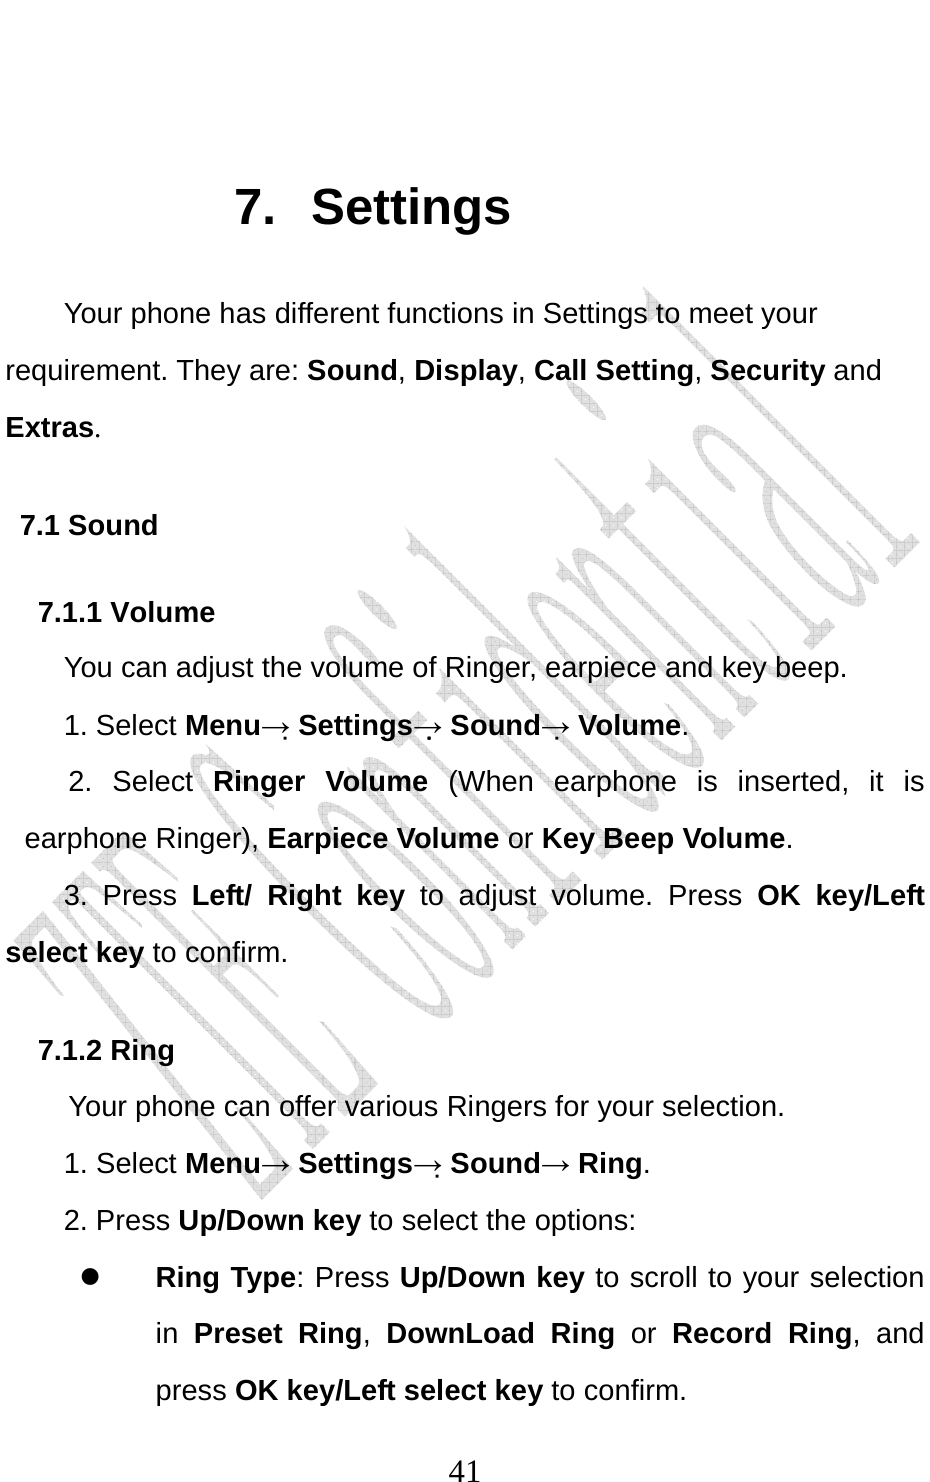                              41 7. Settings Your phone has different functions in Settings to meet your requirement. They are: Sound, Display, Call Setting, Security and Extras. 7.1 Sound 7.1.1 Volume You can adjust the volume of Ringer, earpiece and key beep. 1. Select Menu→ Settings→ Sound→ Volume. 2. Select Ringer Volume (When earphone is inserted, it is earphone Ringer), Earpiece Volume or Key Beep Volume. 3. Press Left/ Right key to adjust volume. Press OK key/Left select key to confirm. 7.1.2 Ring   Your phone can offer various Ringers for your selection.   1. Select Menu→ Settings→ Sound→ Ring.  2. Press Up/Down key to select the options: z Ring Type: Press Up/Down key to scroll to your selection in Preset Ring,  DownLoad Ring or  Record Ring, and press OK key/Left select key to confirm. 